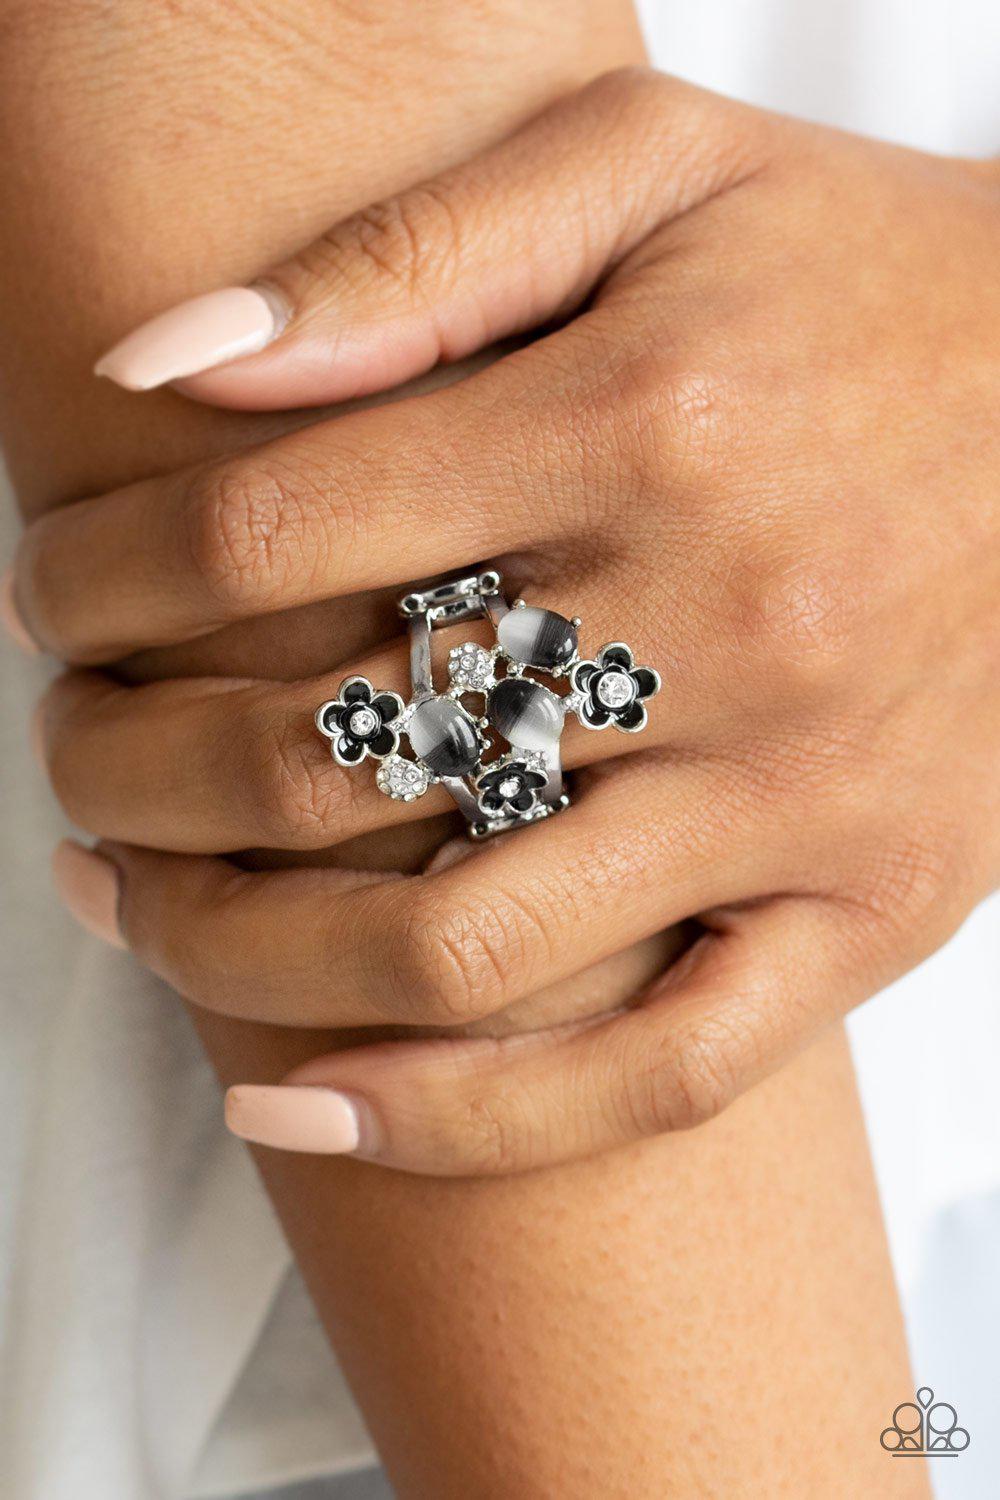 Daisy Delight Black and White Moonstone Flower Ring - Paparazzi Accessories-CarasShop.com - $5 Jewelry by Cara Jewels